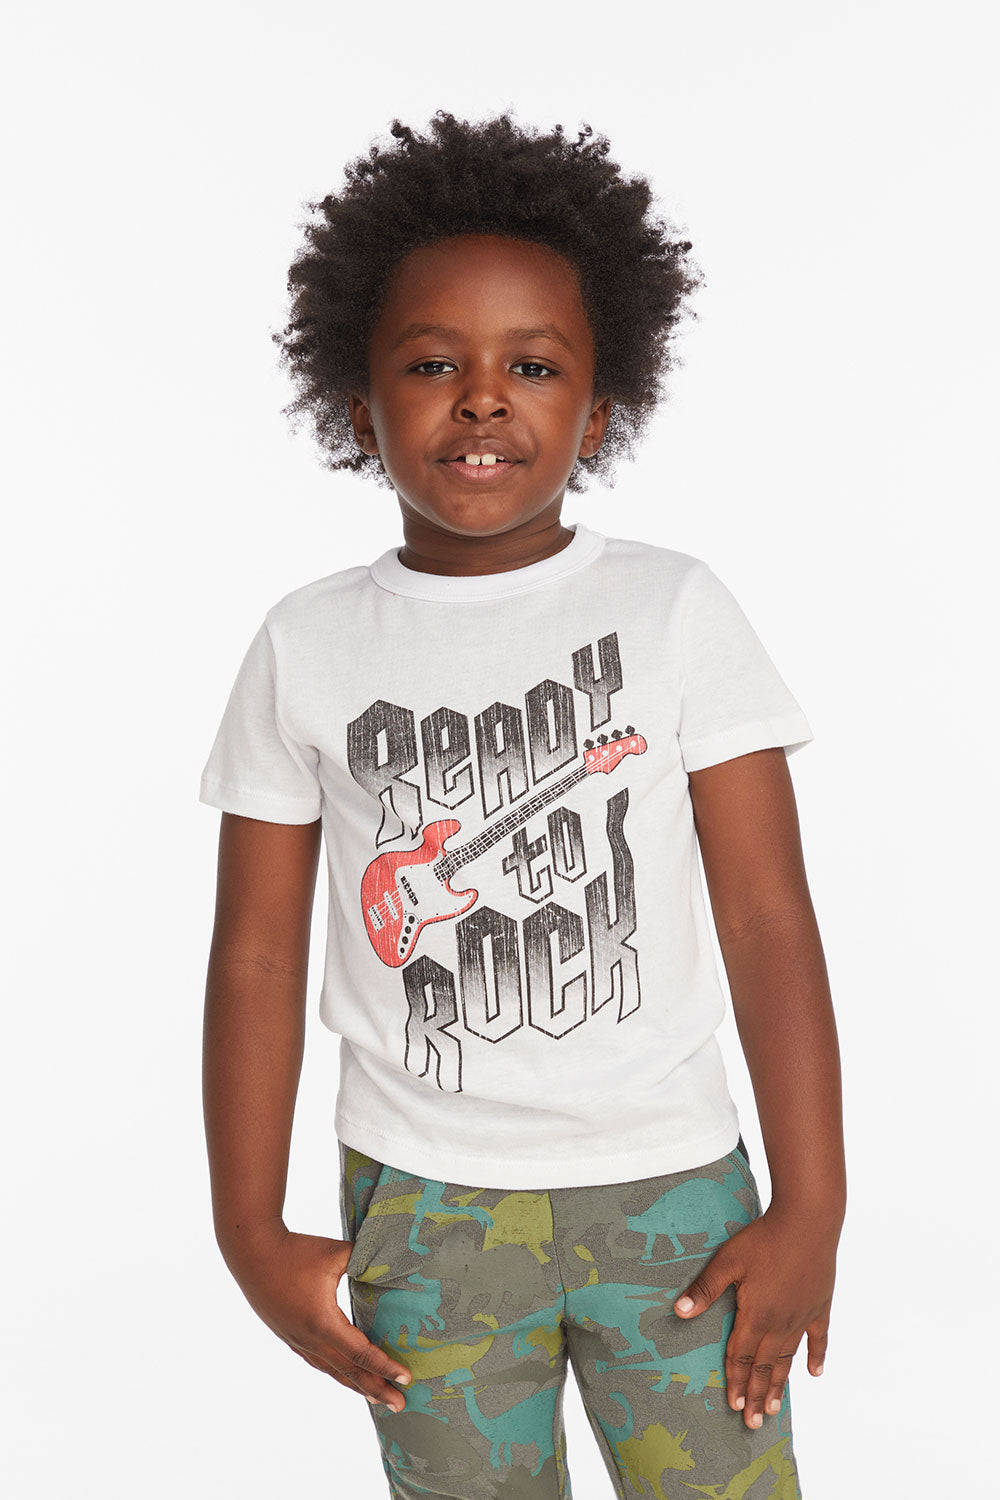 Ready To Rock Boys Tee Boys chaserbrand